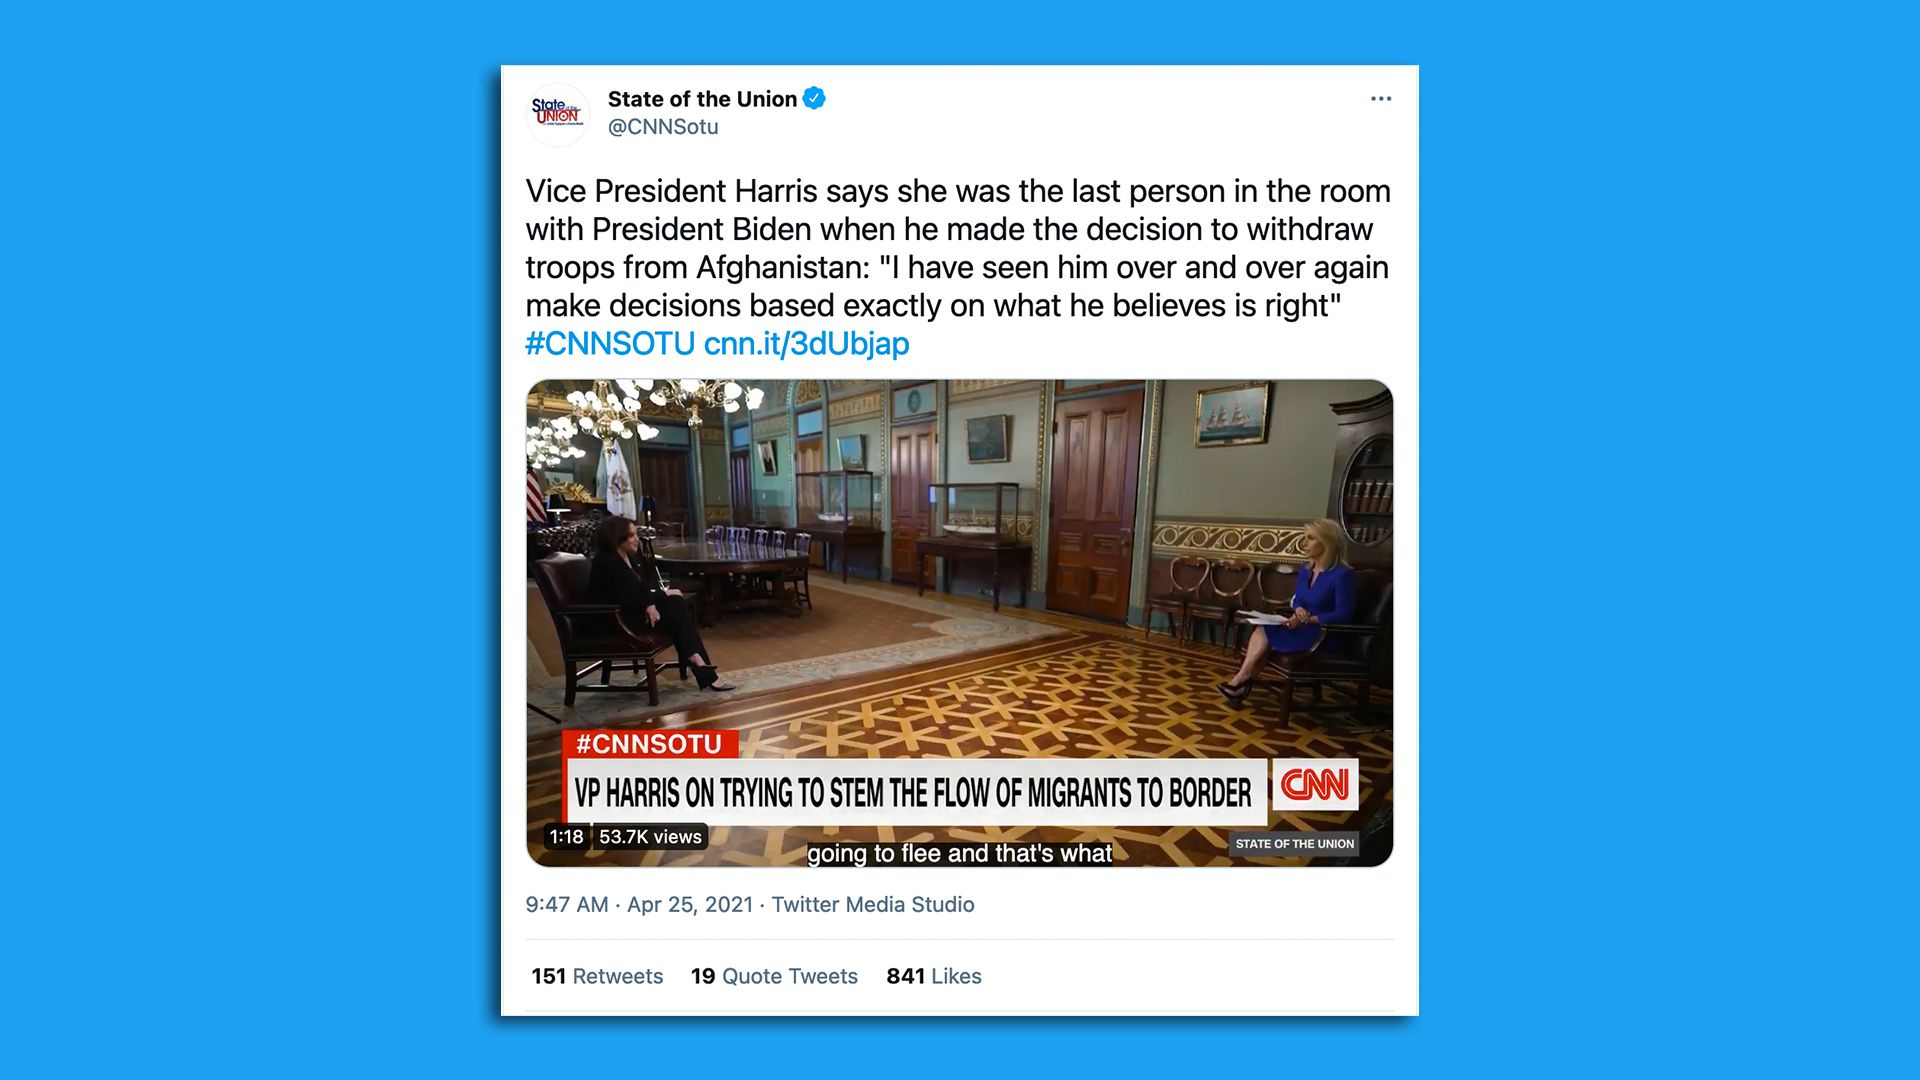 A screenshot shows a CNN tweet with Vice President Kamala Harris saying she was the last person in the room when President Biden decided with withdraw all U.S. troops from Afghanistan.